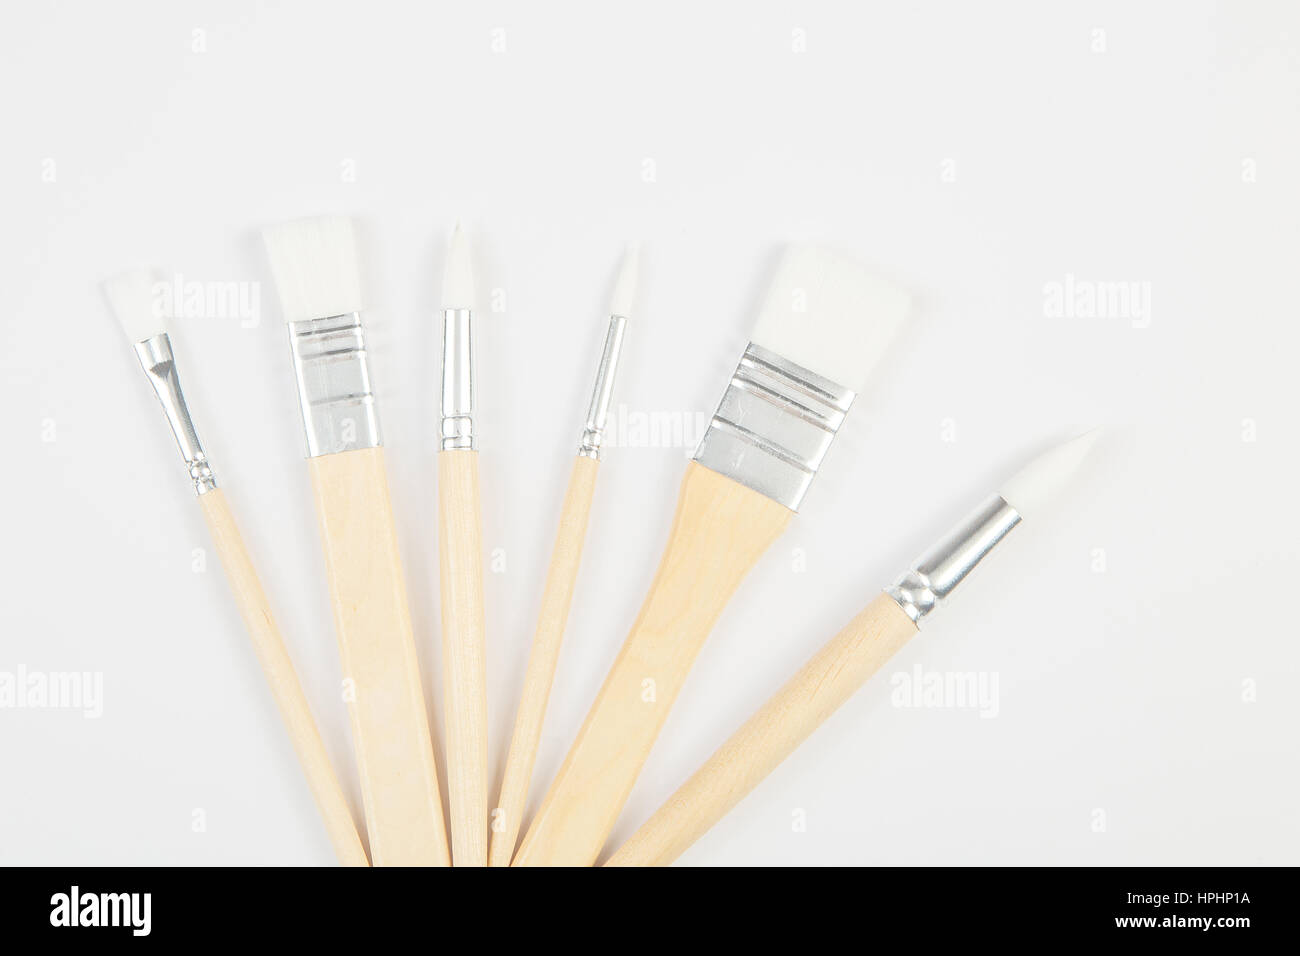 White paintbrushes with wooden handle on clear background Stock Photo